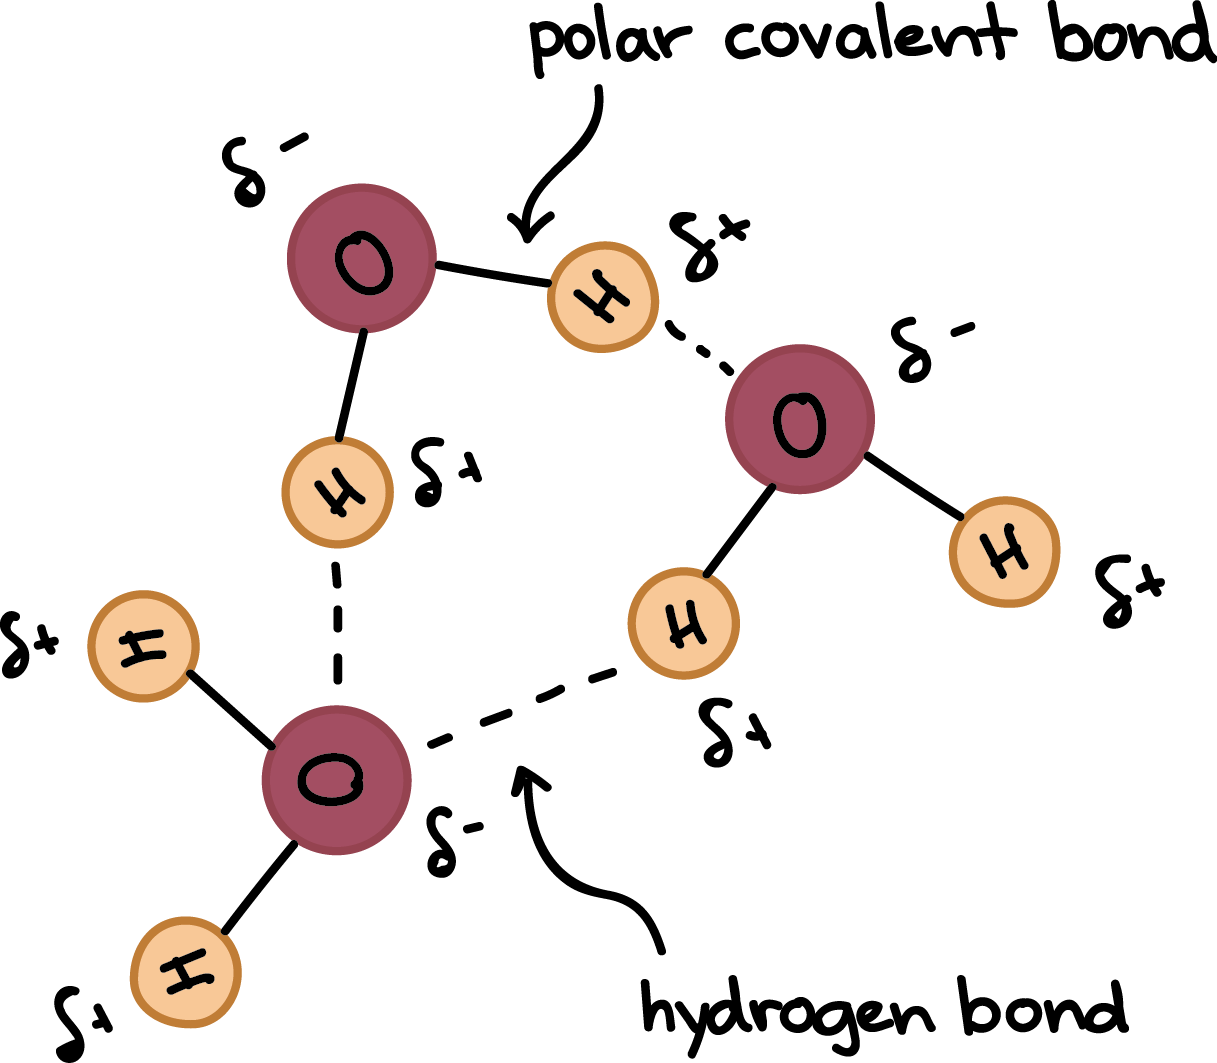 <p>weak chemical bond . formed when slightly <mark data-color="green">positive hydrogen atom of a polar covalent</mark> ( unequal sharing ) in one molecule is attracted to a <mark data-color="red">negative atom of a polar covalent bond</mark> .OPPOSITEs  attract ( + and - )</p><ul><li><p><strong>this bond is between whole molecules</strong></p></li></ul>